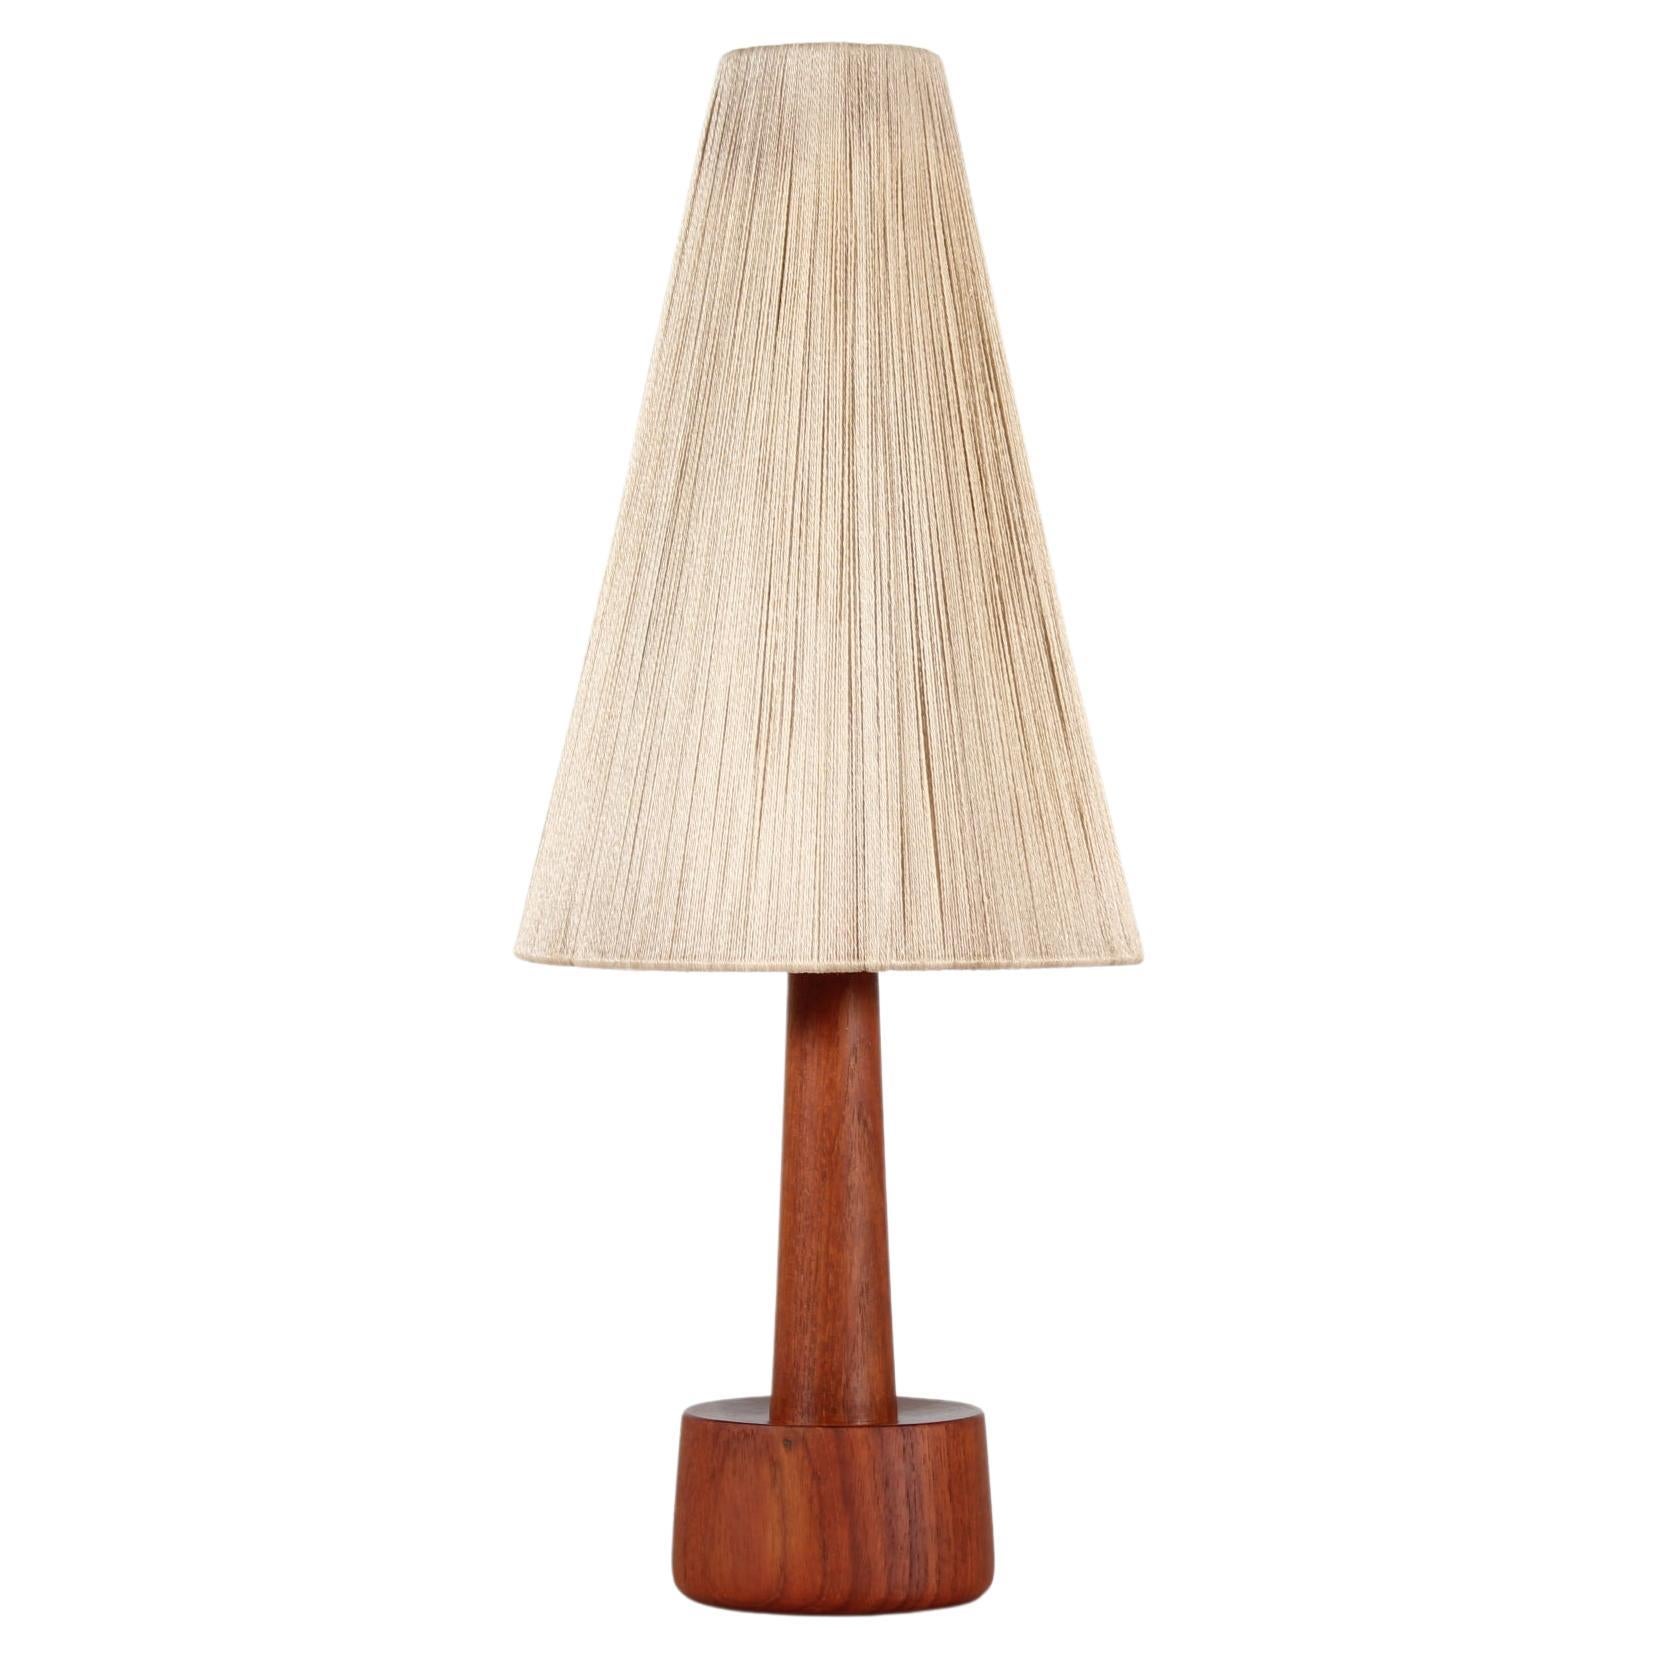 Danish Modernist Table Lamp of Teak with Cone-Shaped Yarn Shade 1970s For Sale